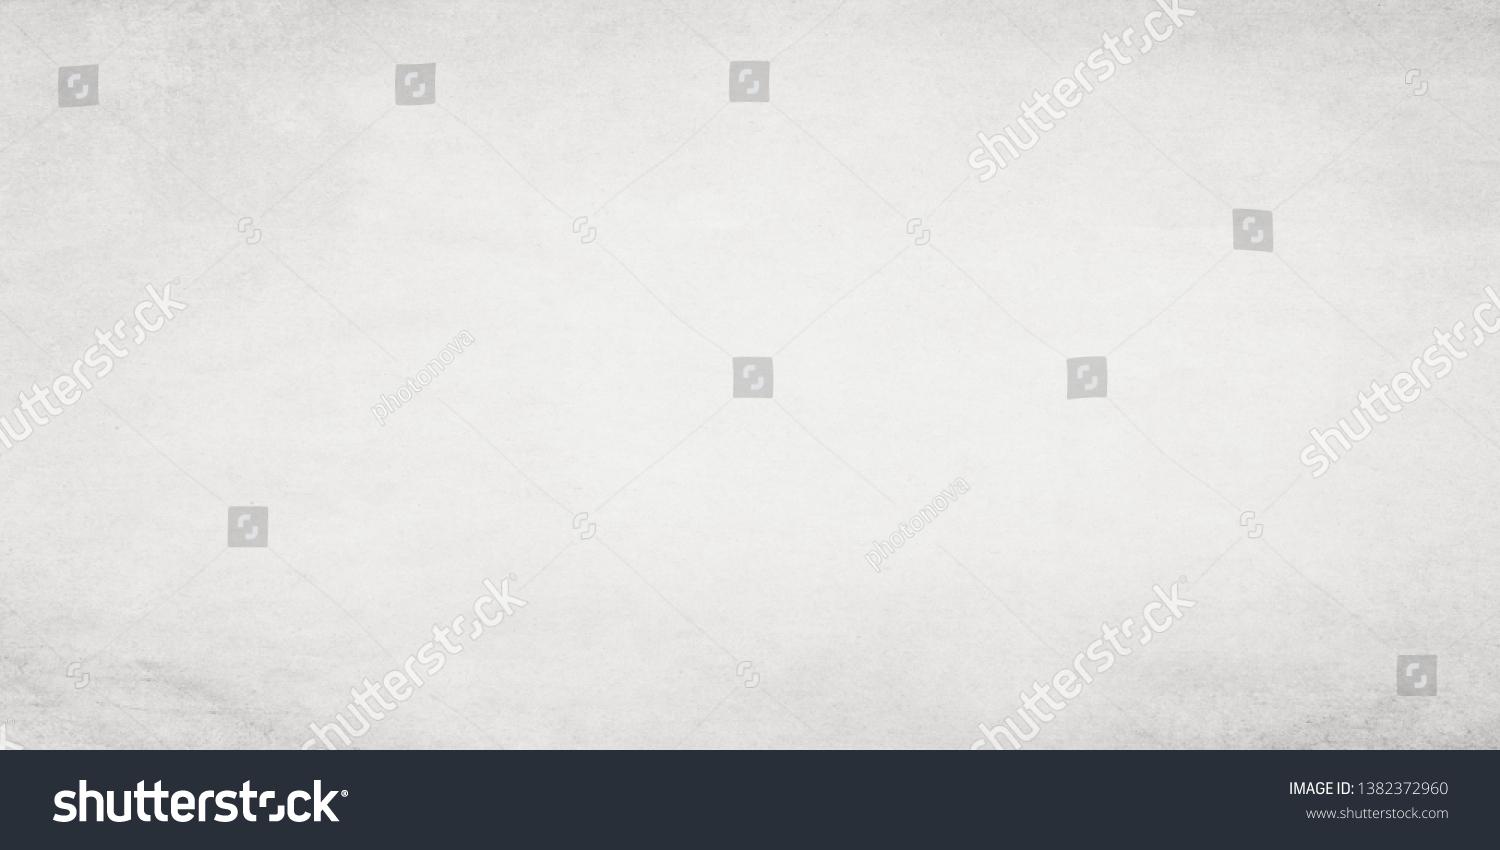 Light gray low contrast texture.
Old stained paper wallpaper for design work with copy space. #1382372960